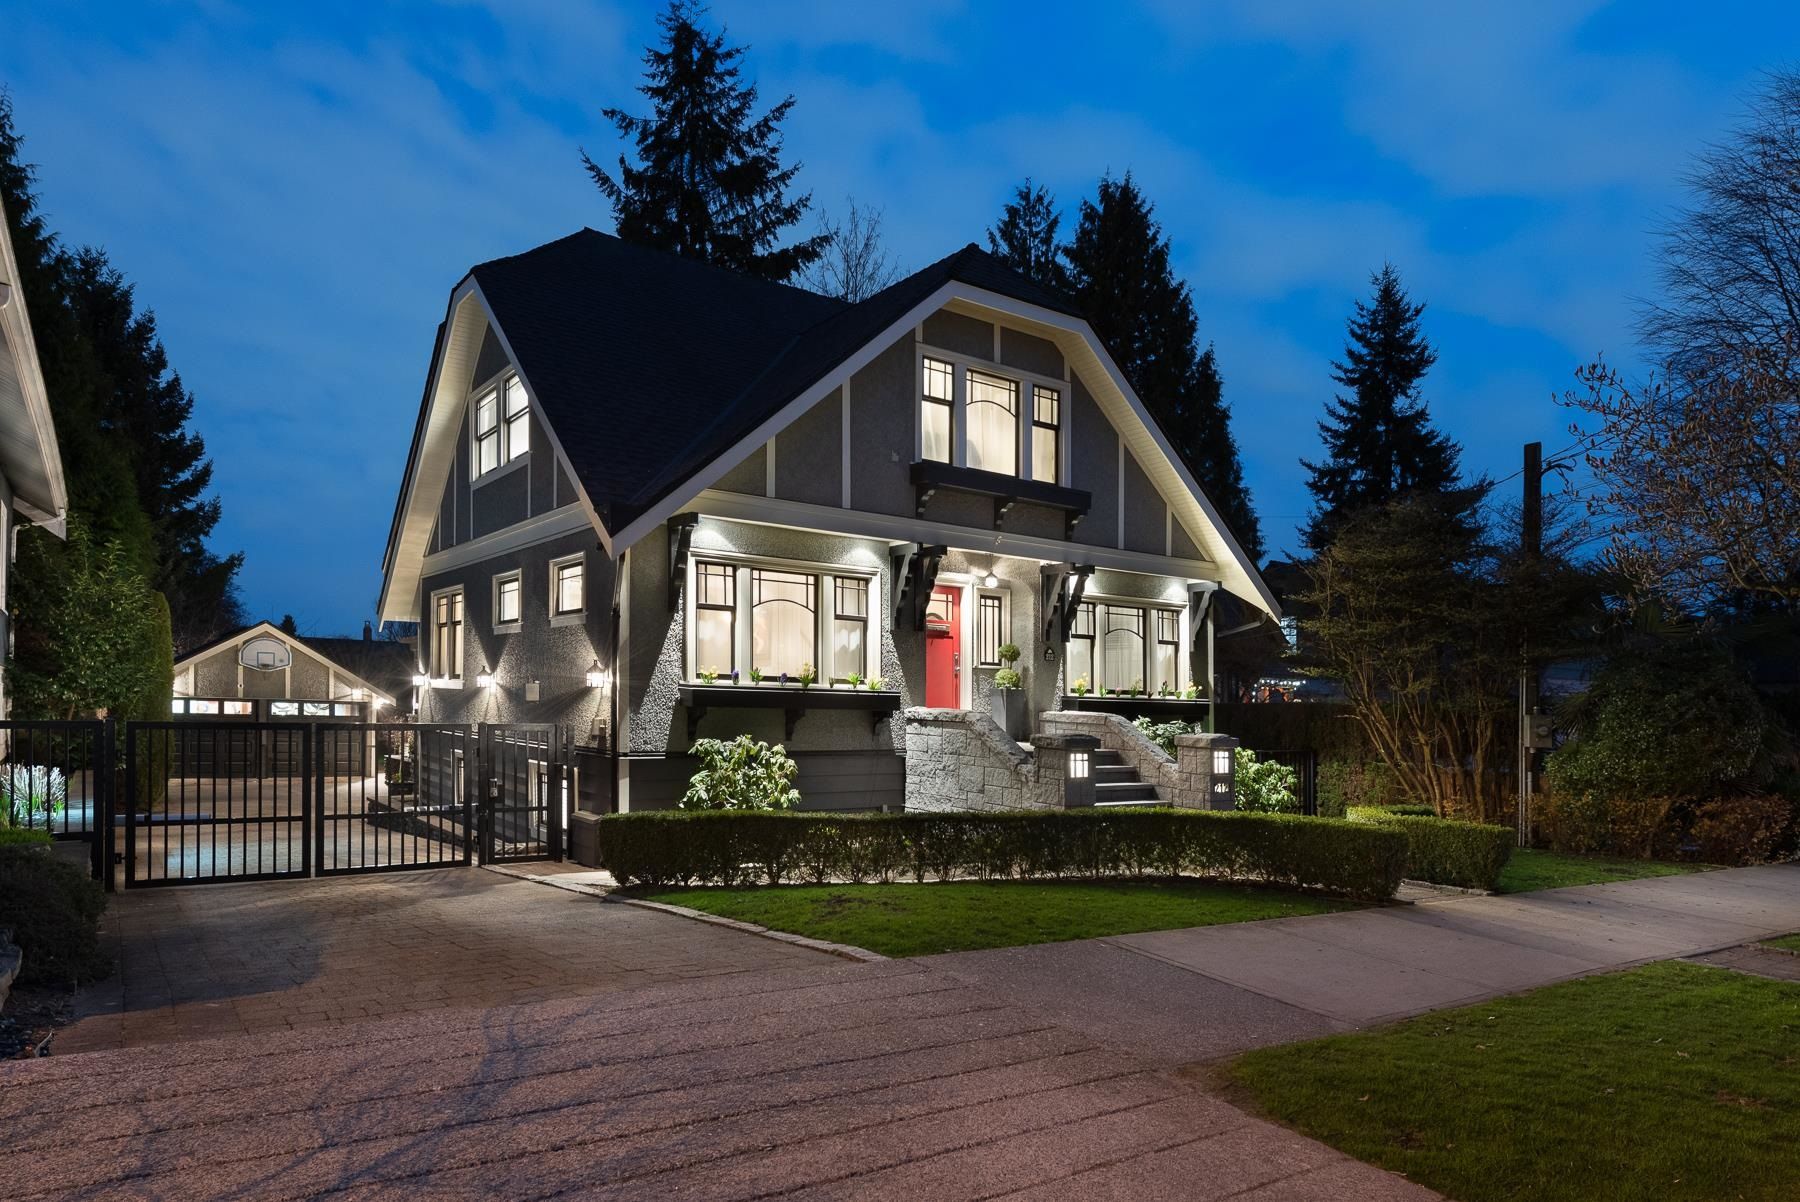 New Westminster homes